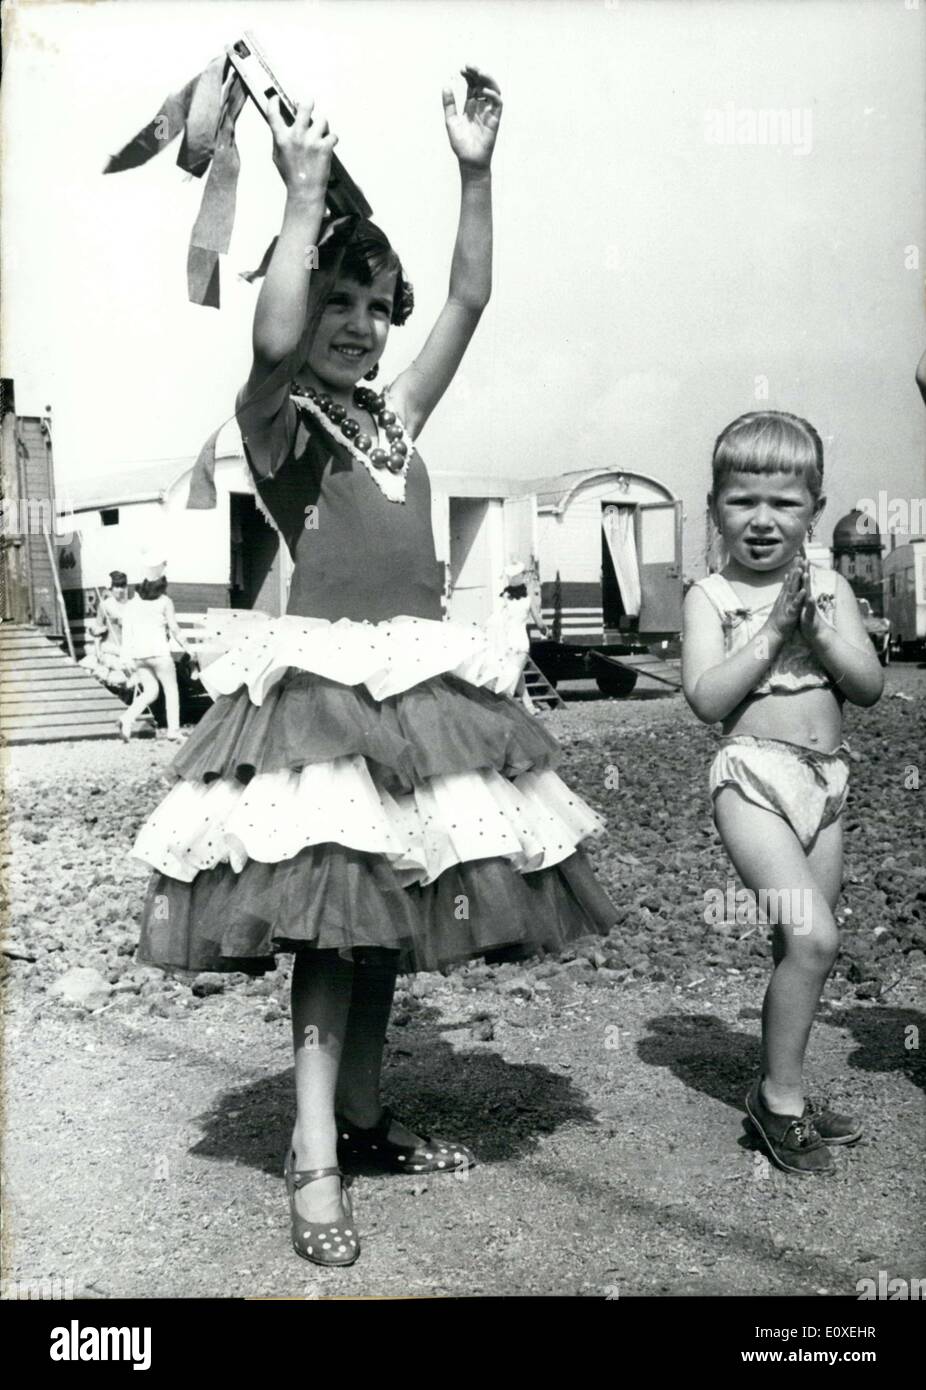 May 21, 1966 - Pictured here is Carmen(left) and a spectator watching her. Carmen is a dancer in a circus currently guesting in Stock Photo